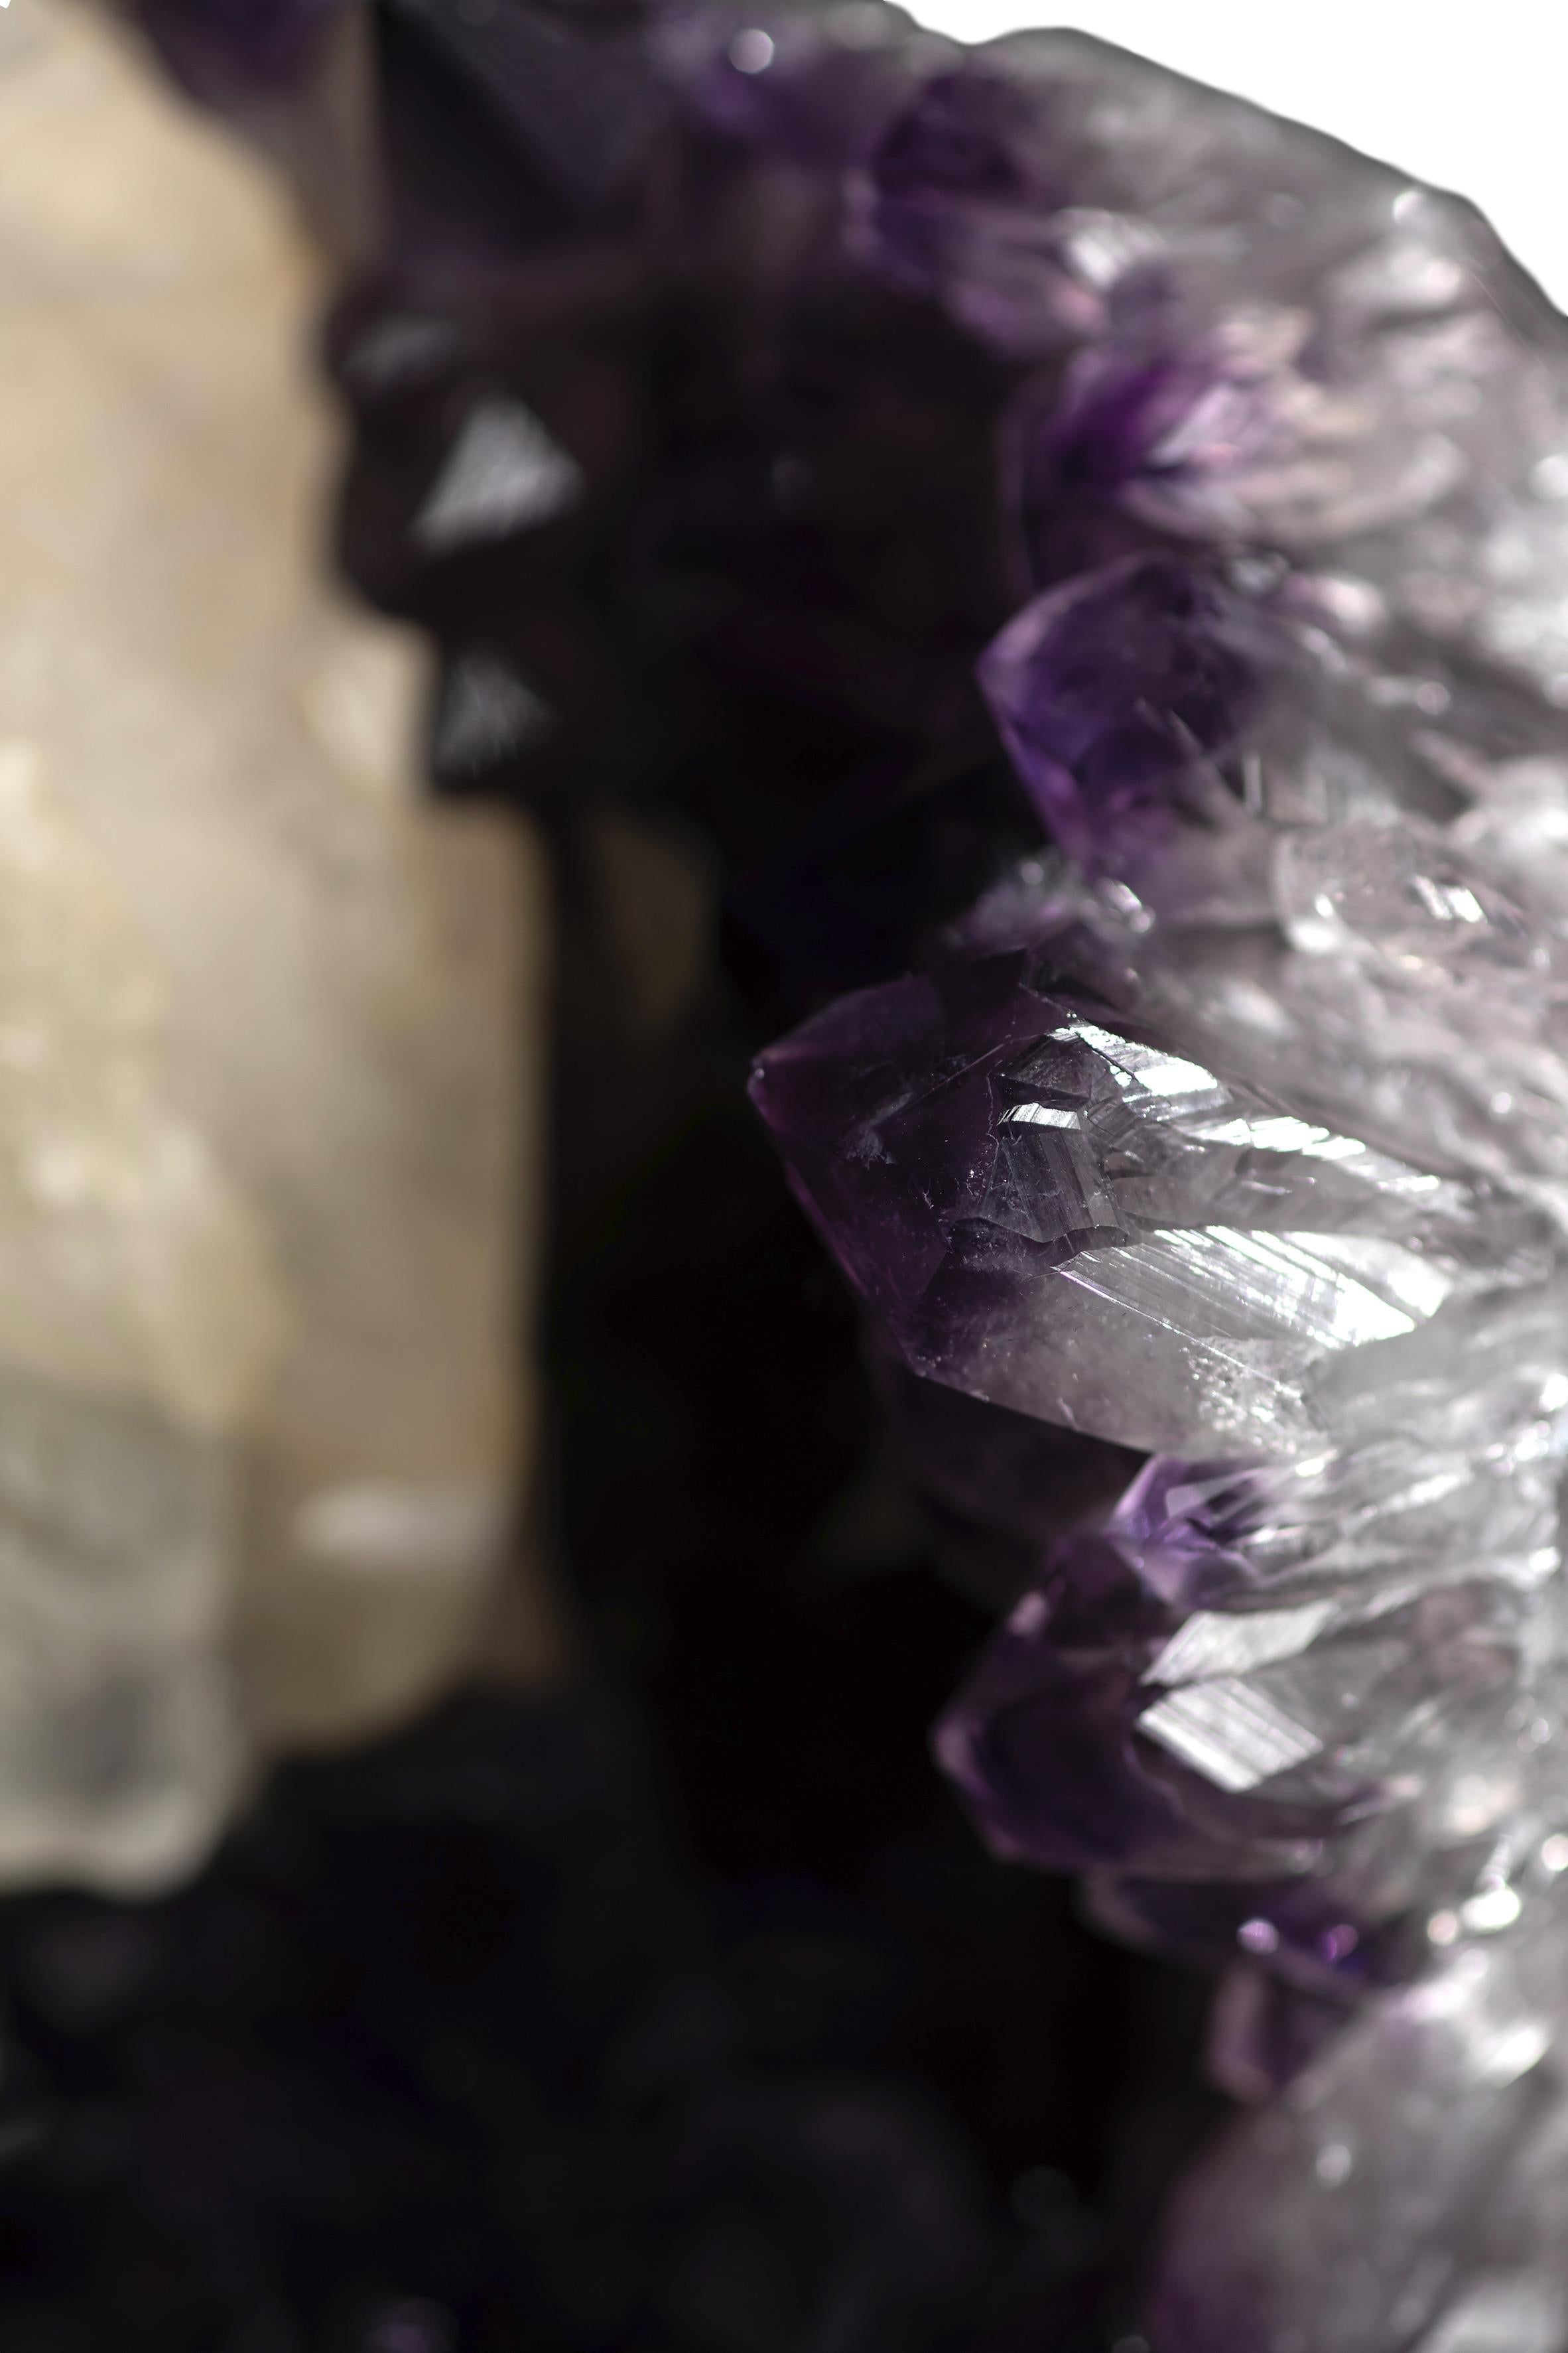 A exquisite amethyst geode cluster with an incredible calcite formation at the top. The interior of the piece is contains a very deep cavity which presents very high-quality amethyst, due to its deep purple high peaked crystals with a rare calcite